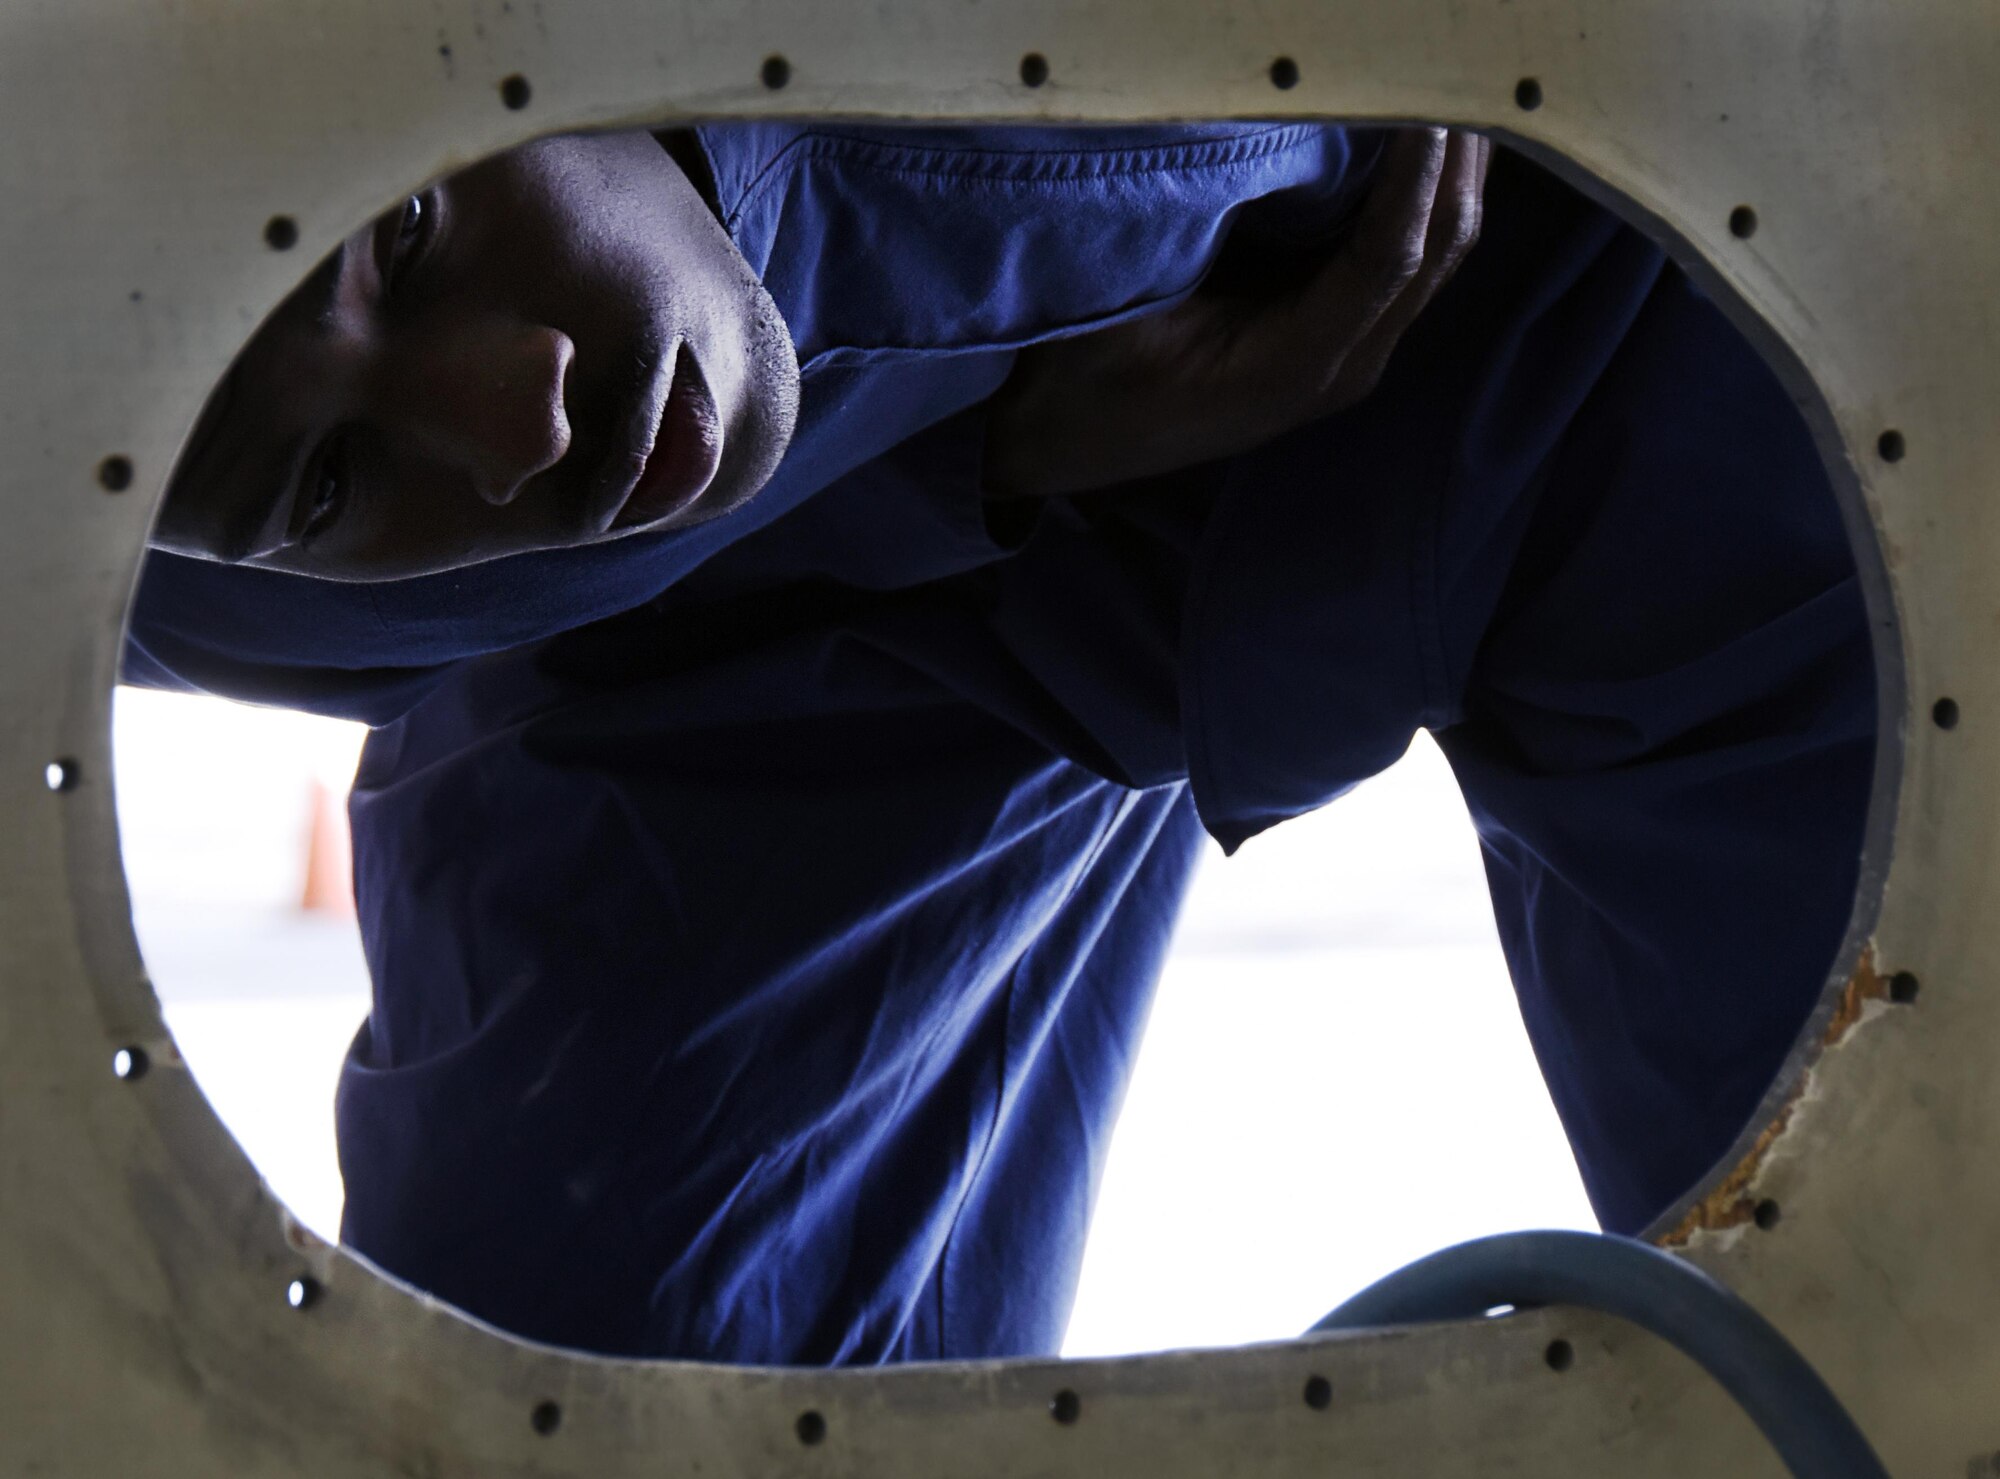 U.S. Air Force Senior Airman Jacob Williams, an aircraft fuel systems repair technician with the 379th Expeditionary Maintenance Squadron, looks into a mock fuel cell during a confined space training exercise at Al Udeid Air Base, Qatar, April 14, 2017. Given the possible dangers associated with working in a fuel cell, these Airmen counteract the risk by training in realistic scenarios. (U.S. Air Force photo by Senior Airman Cynthia A. Innocenti)